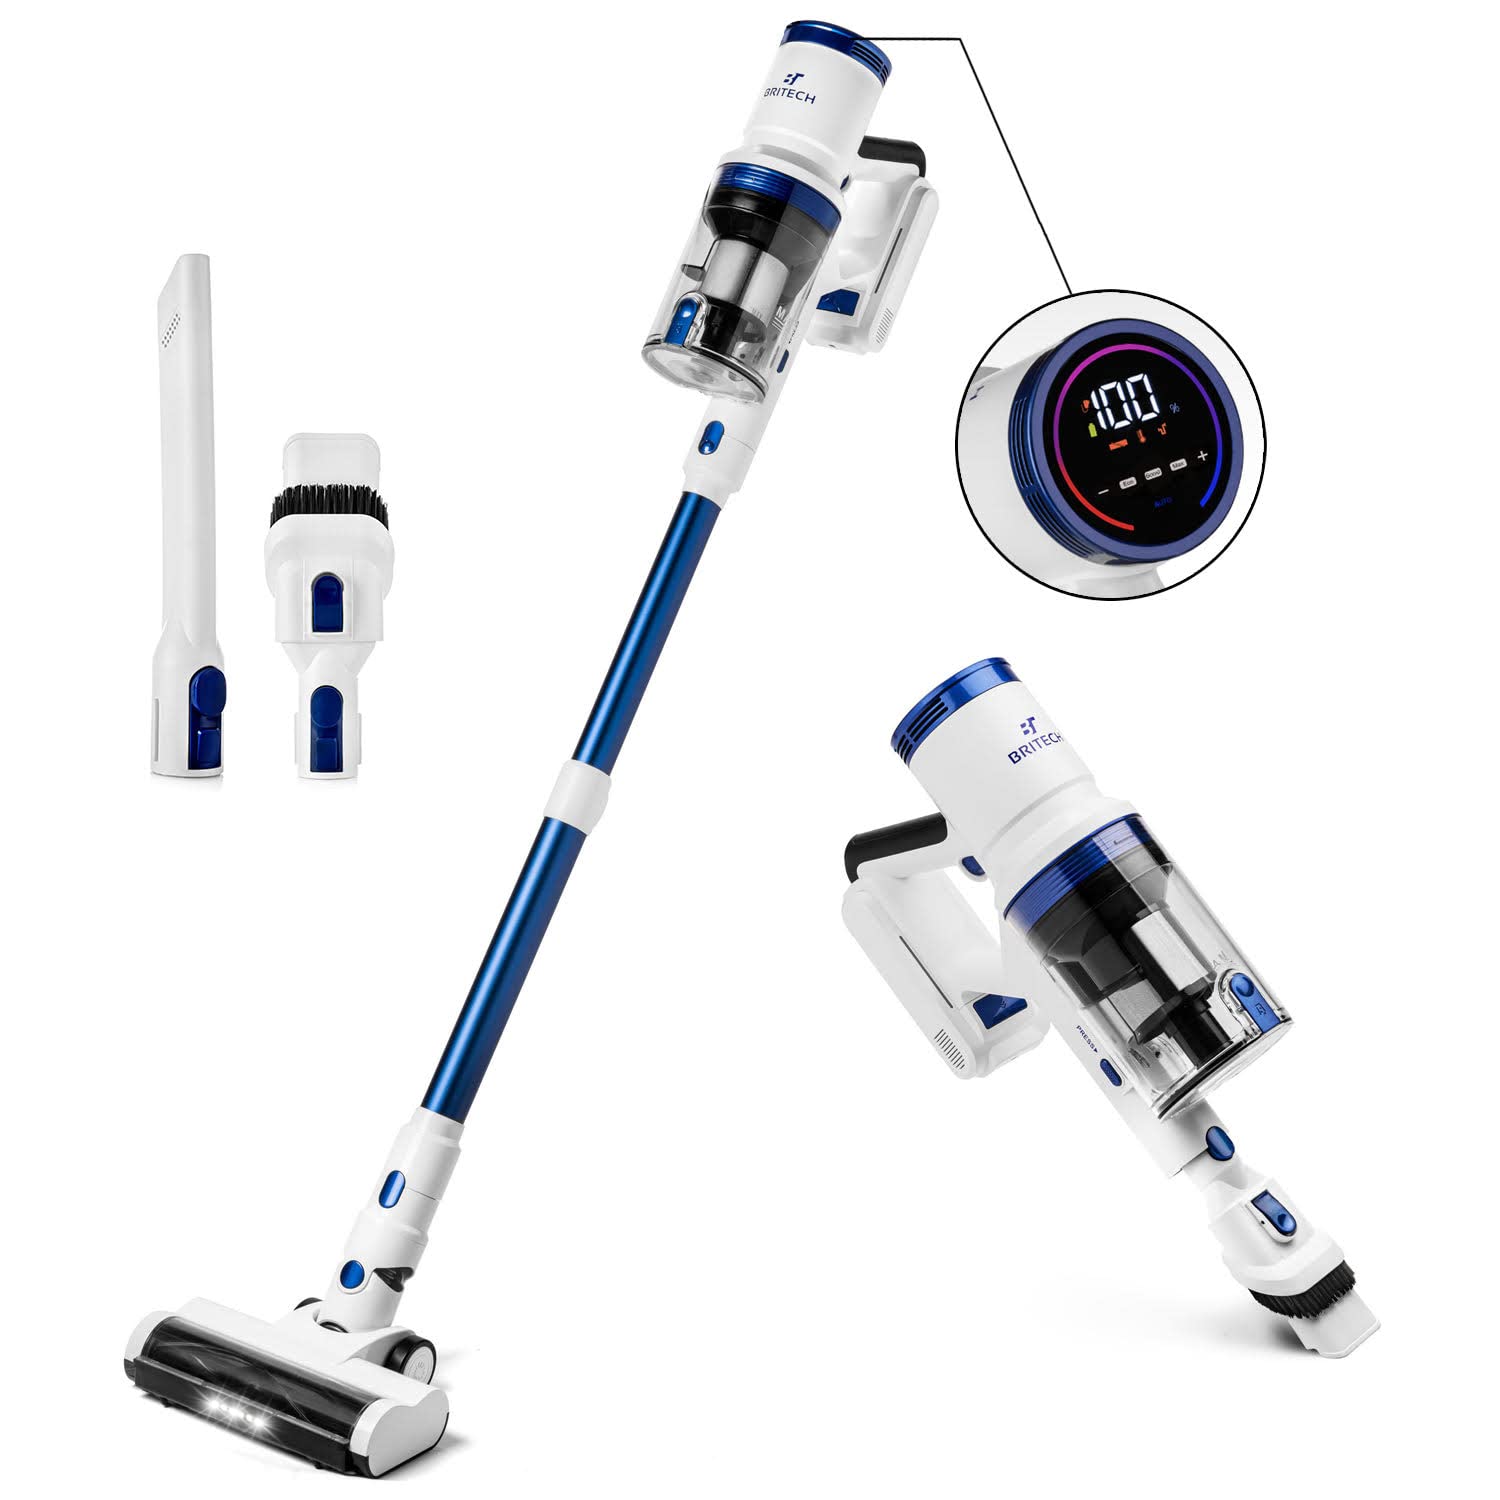 BRITECH Cordless Lightweight Stick Vacuum Cleaner, 300W Motor for Powerful Suction 40min Runtime, LED Display Screen & Headlights, Great for Carpet Cleaner, Hardwood Floor & Pet Hair (Blue)  - Very Good